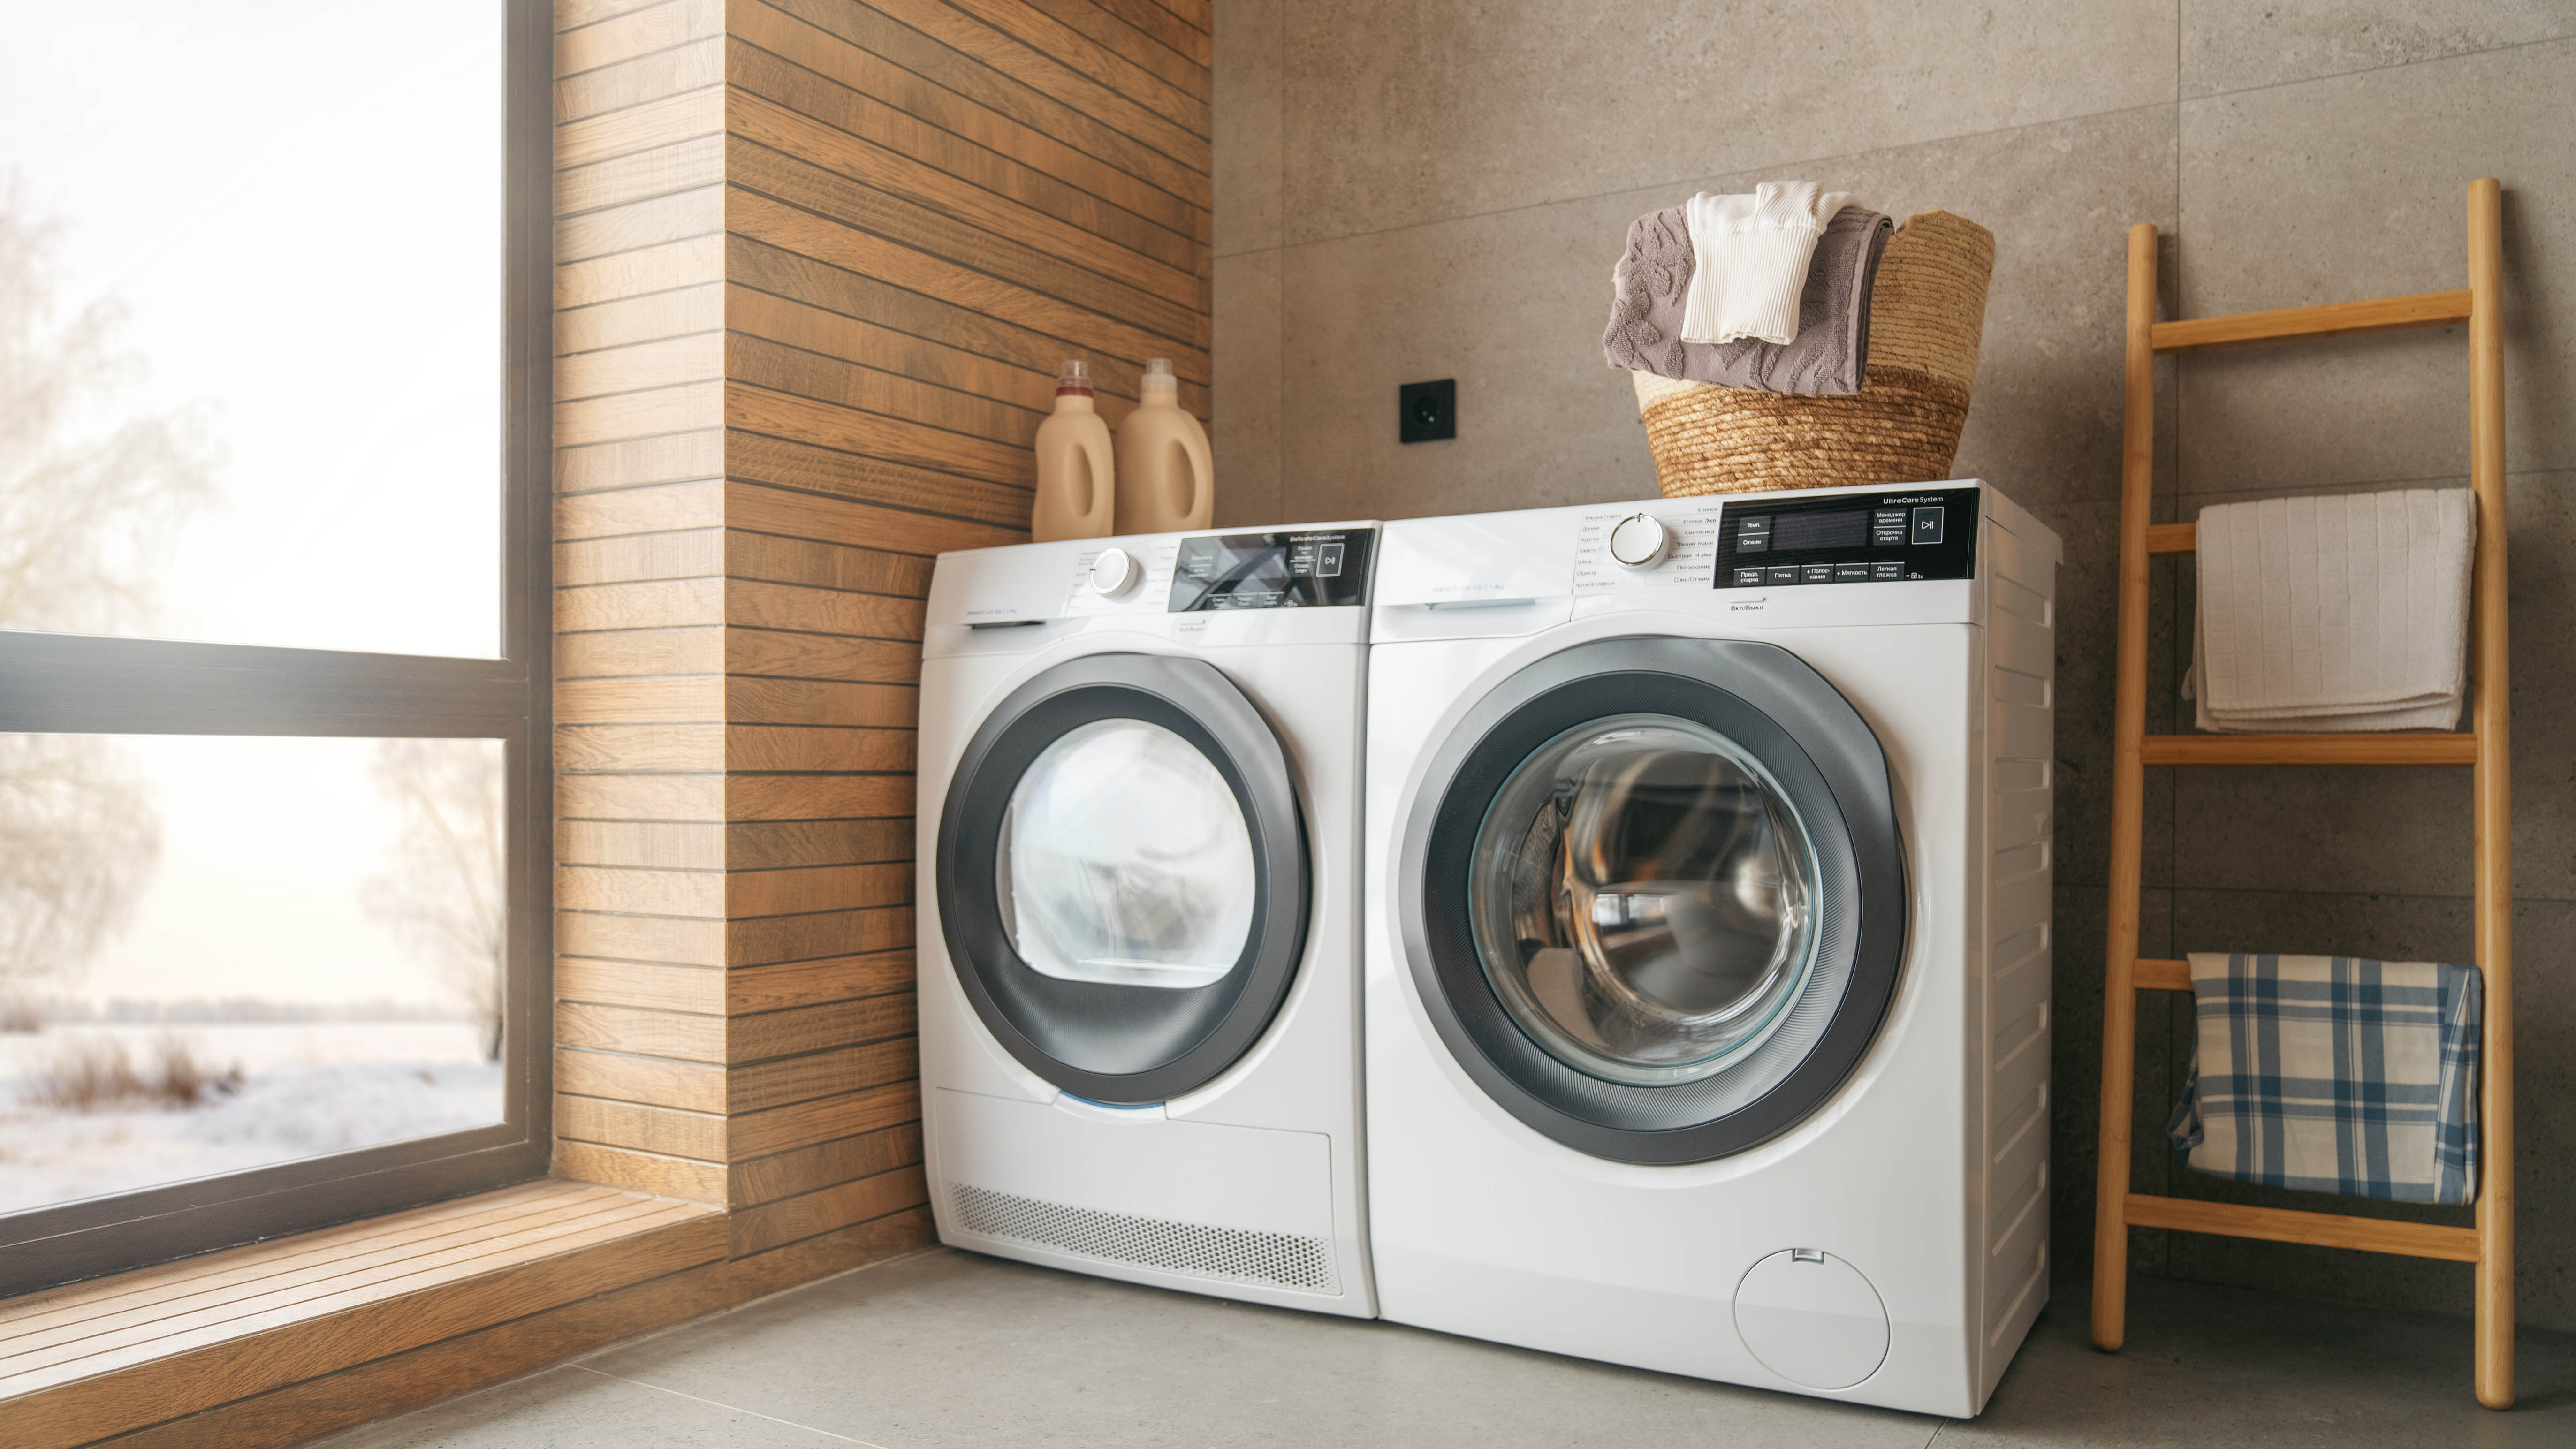 Types of Dryers: A Clothes Dryer Buying Guide